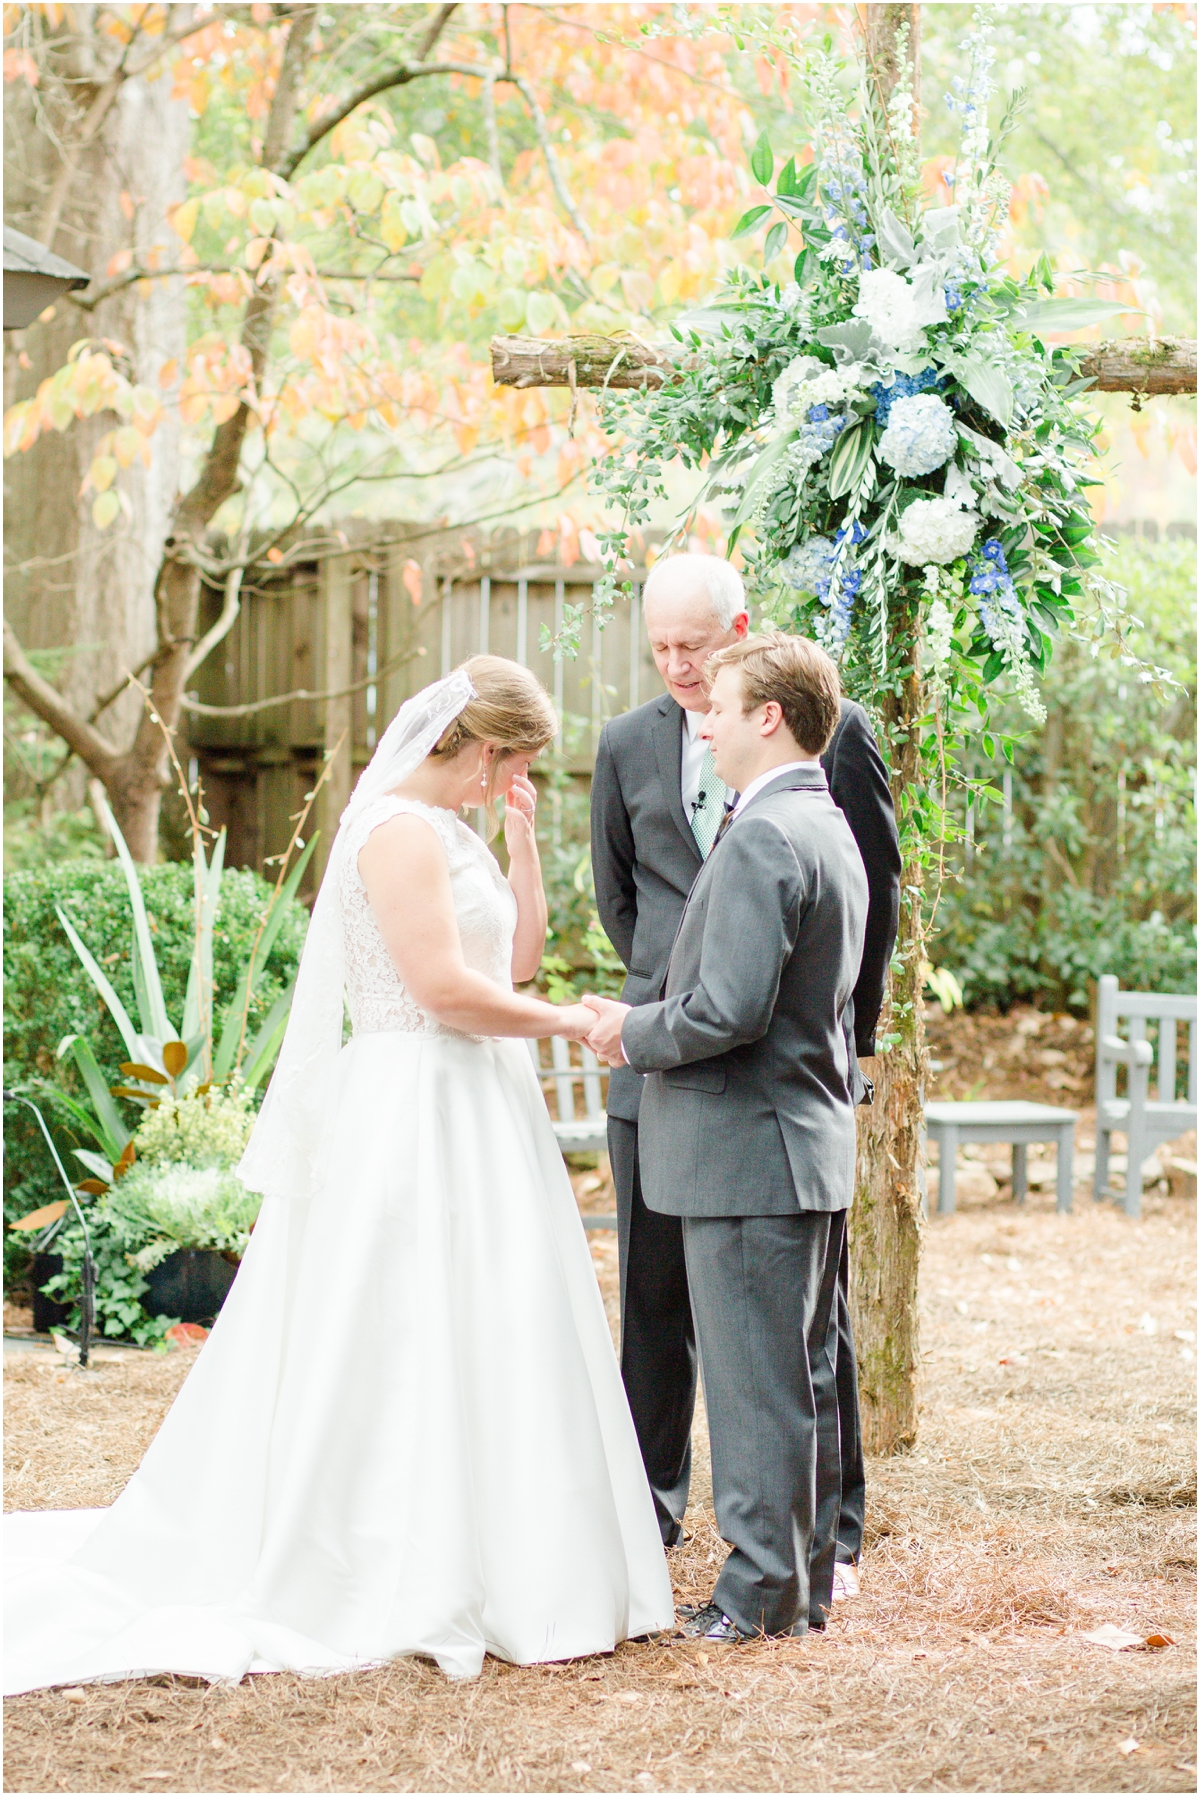 October Backyard wedding in Greenville SC with a reception at the Poinsett Club | Greenville Wedding Photographer